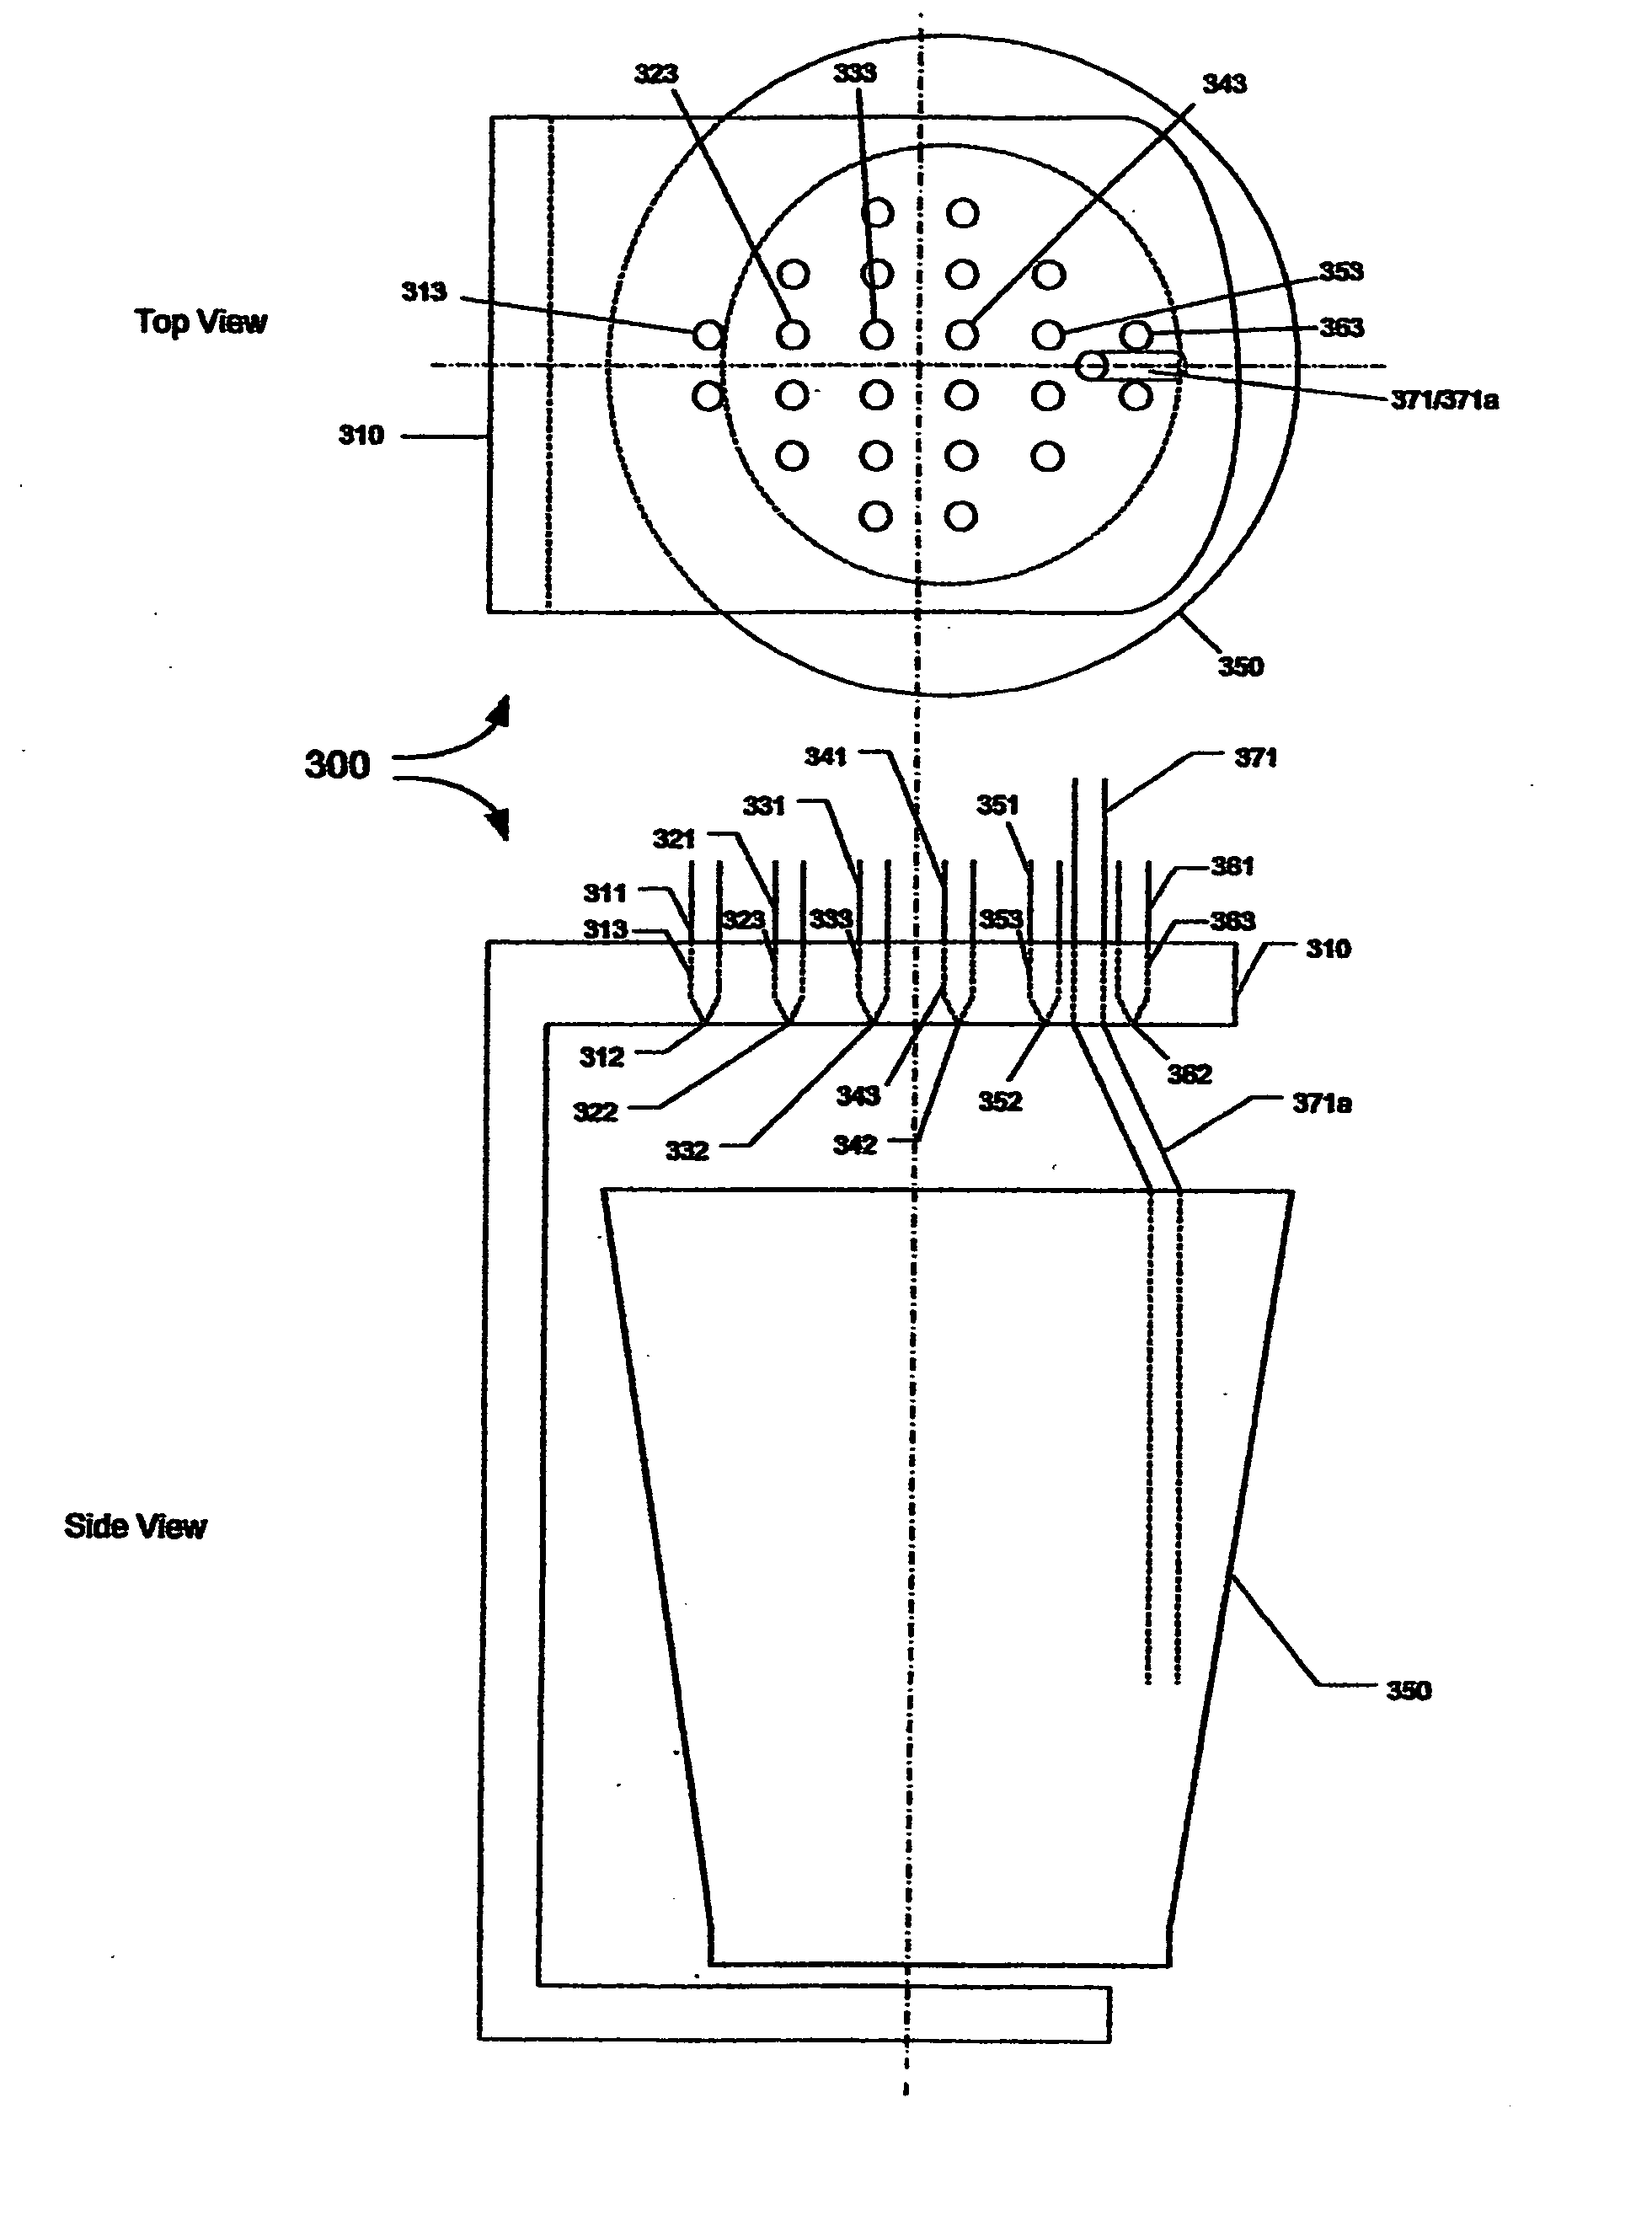 Systems and methods for dispensing fluid